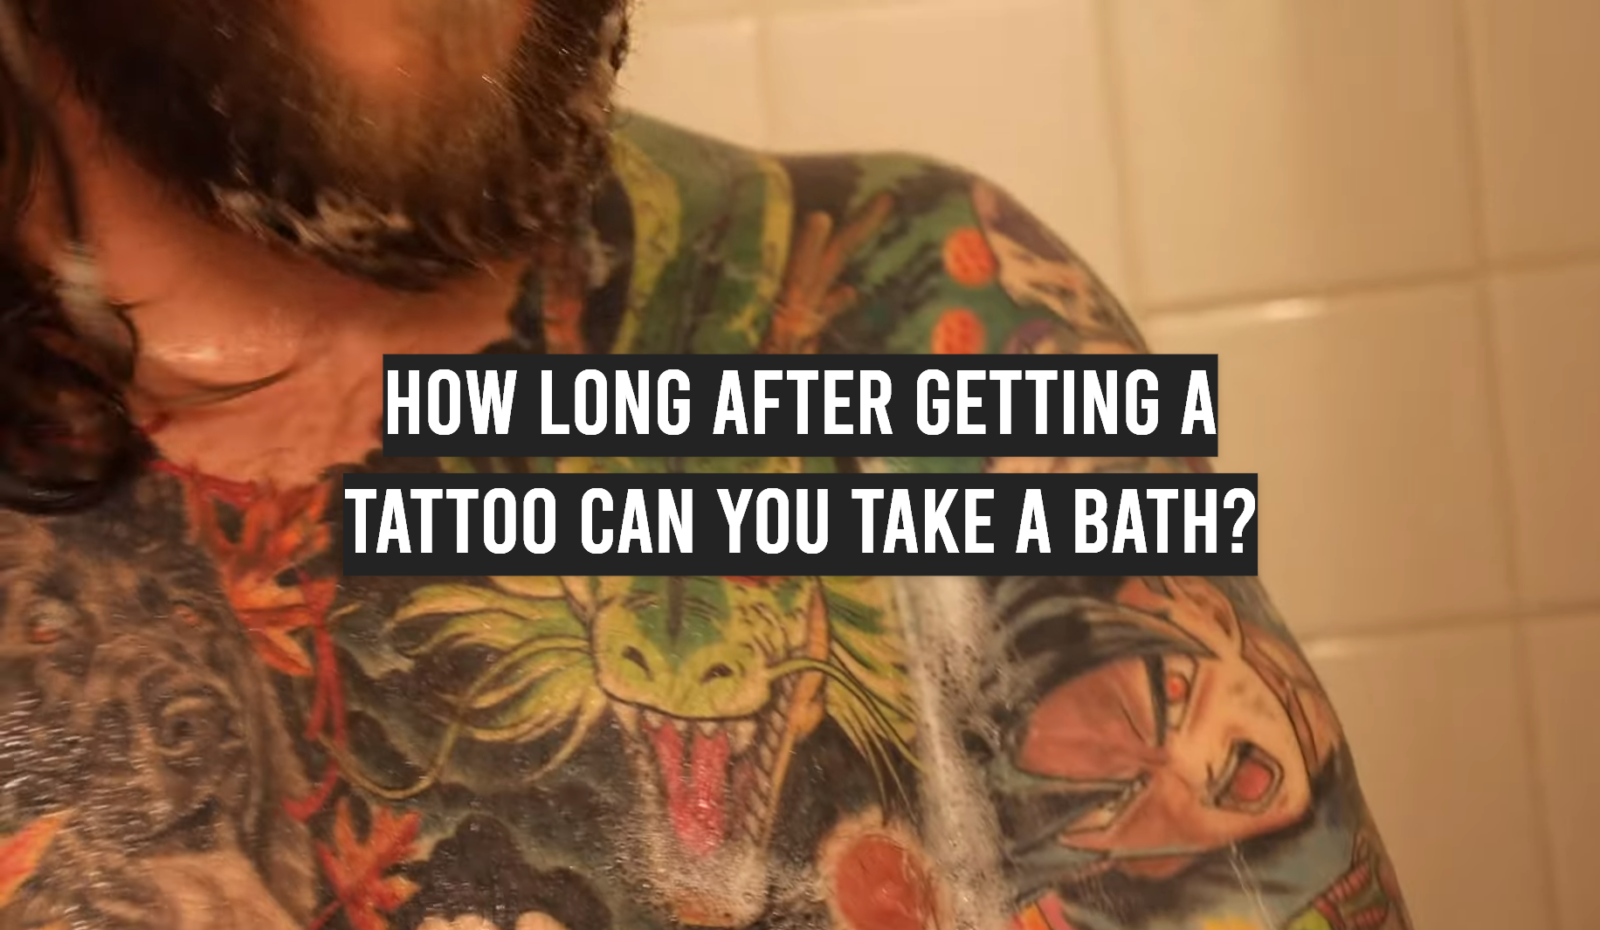 How Long After Getting a Tattoo Can You Take a Bath?